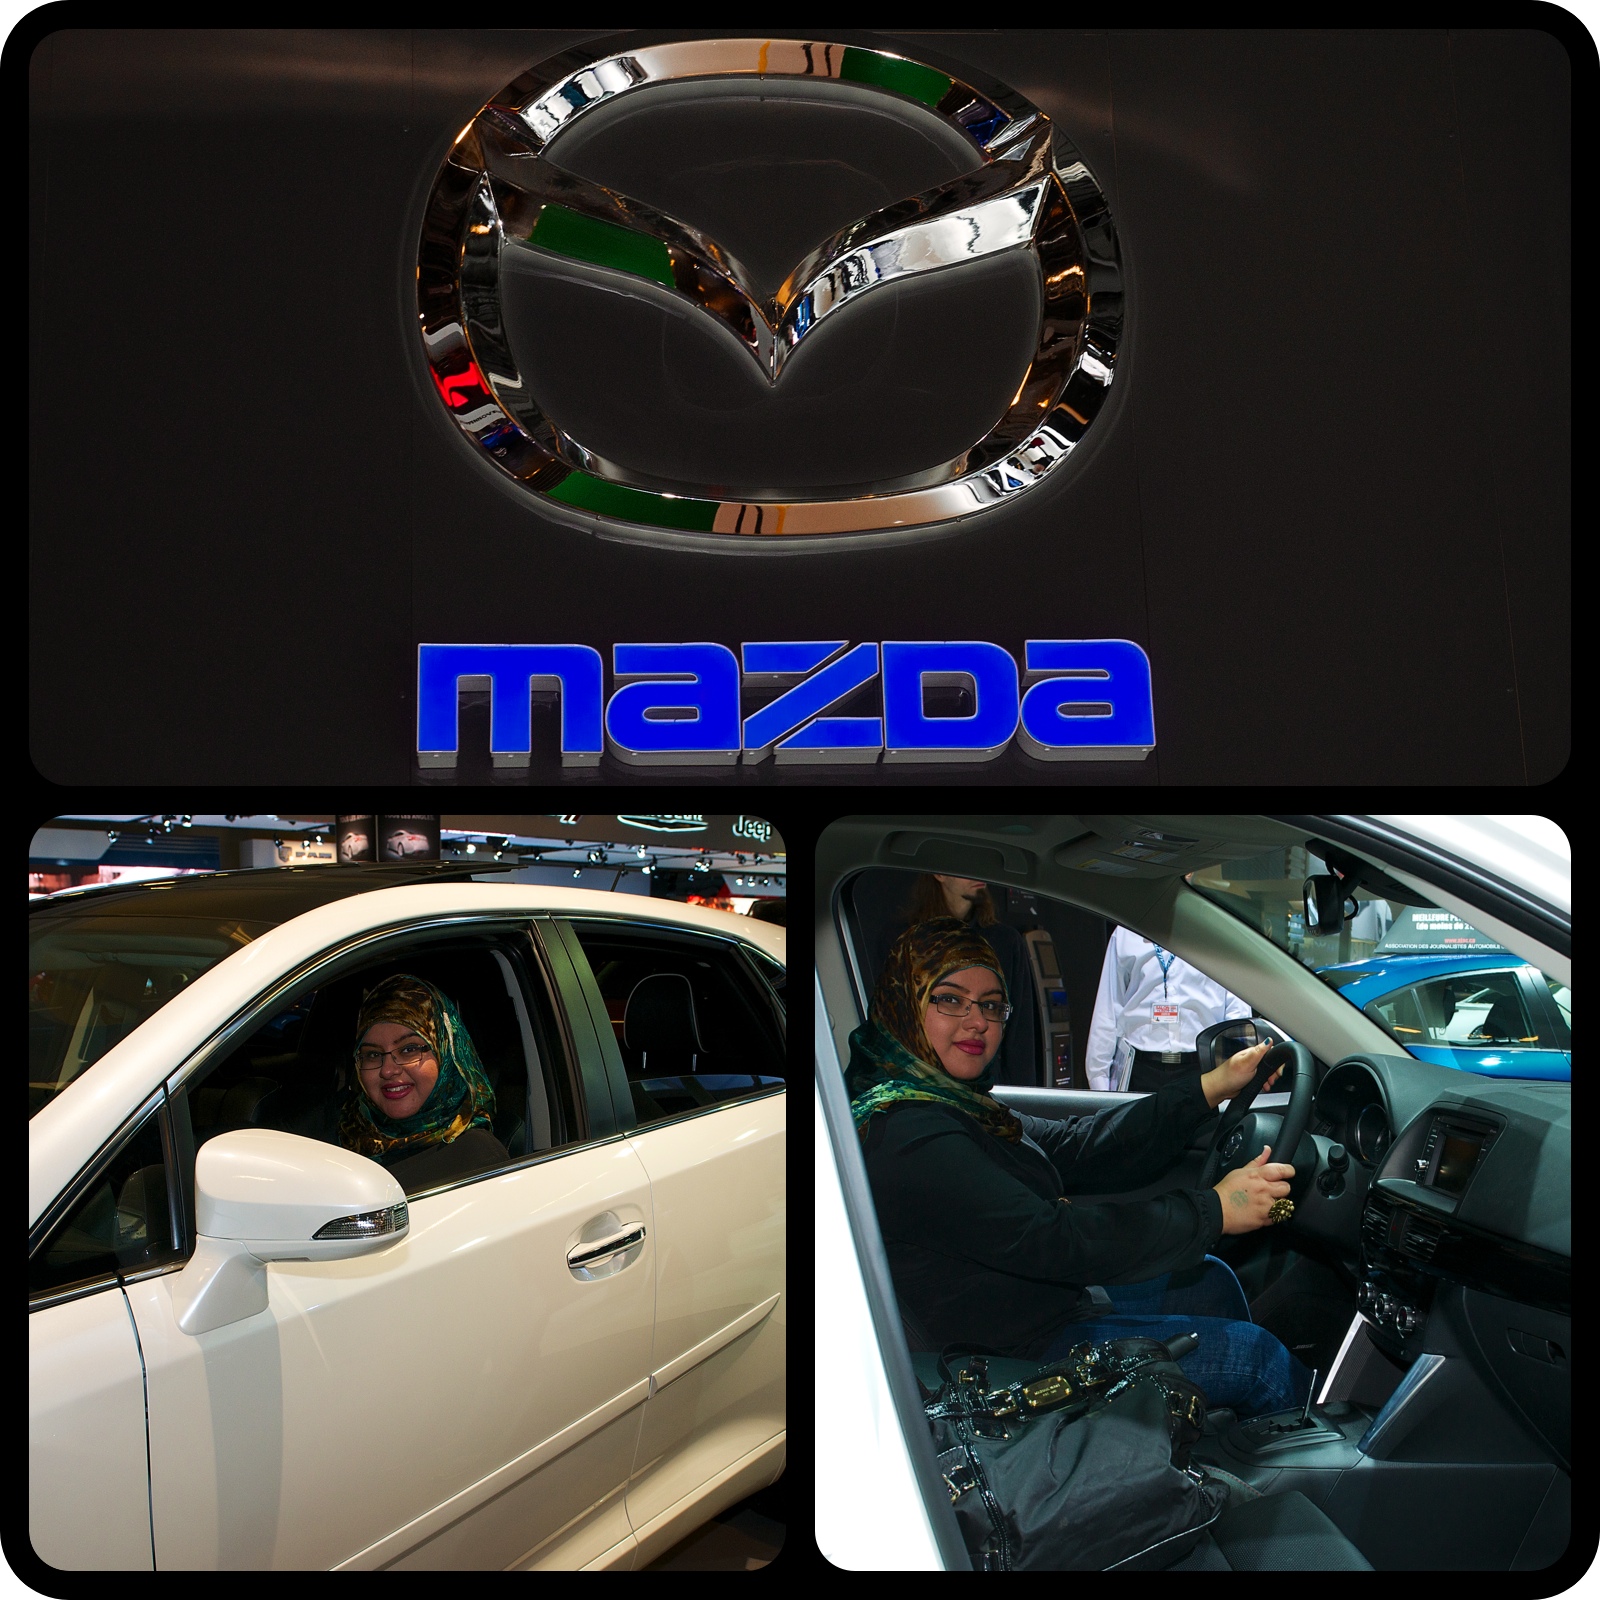 car, cars, review, Montreal Auto show, auto show, review, blog, blogger, CanadianMomEh, Mazda, Fariha Naqvi-Mohamed